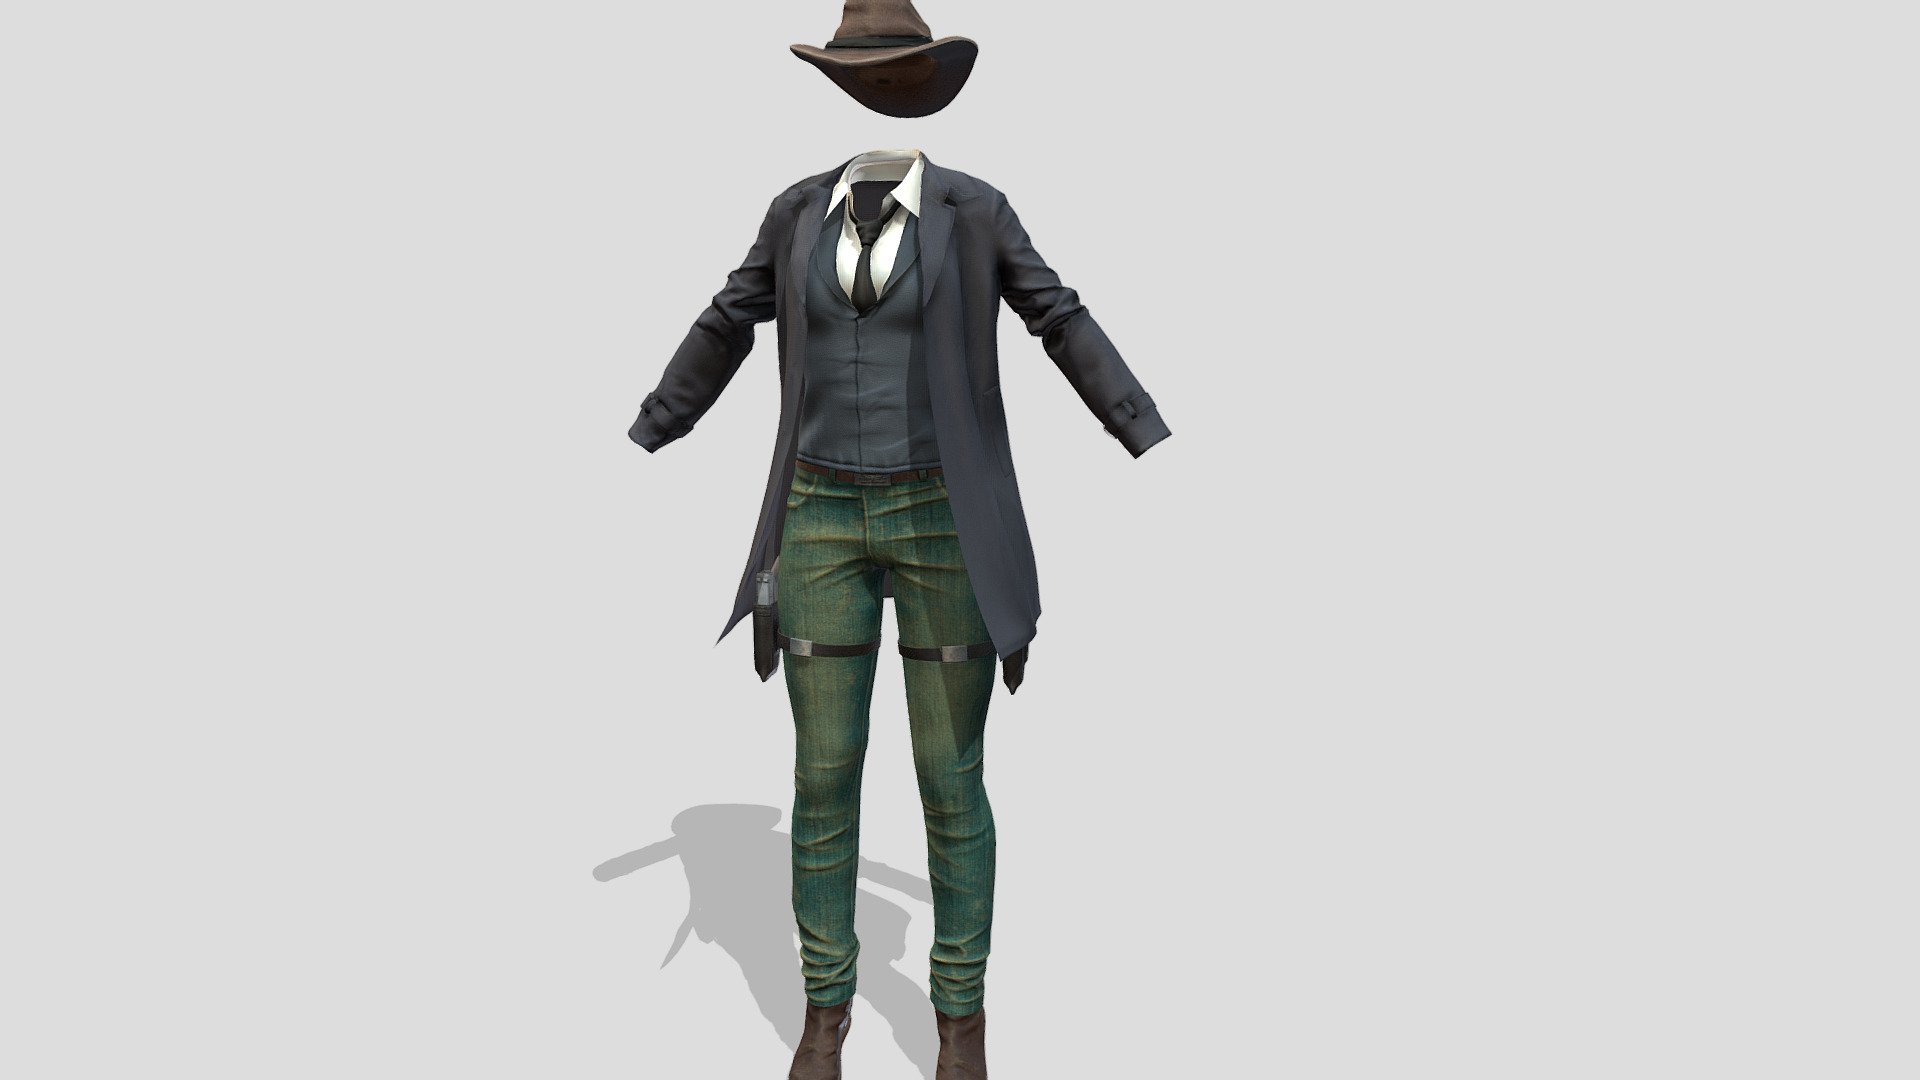 Coat Vest Shirt Pants Boots Hat

Can be fitted to any character

Clean topology

No overlapping smart optimized unwrapped UVs

High-quality realistic textures

FBX, OBJ, gITF, USDZ (request other formats)

PBR or Classic

Type     user:3dia &ldquo;search term